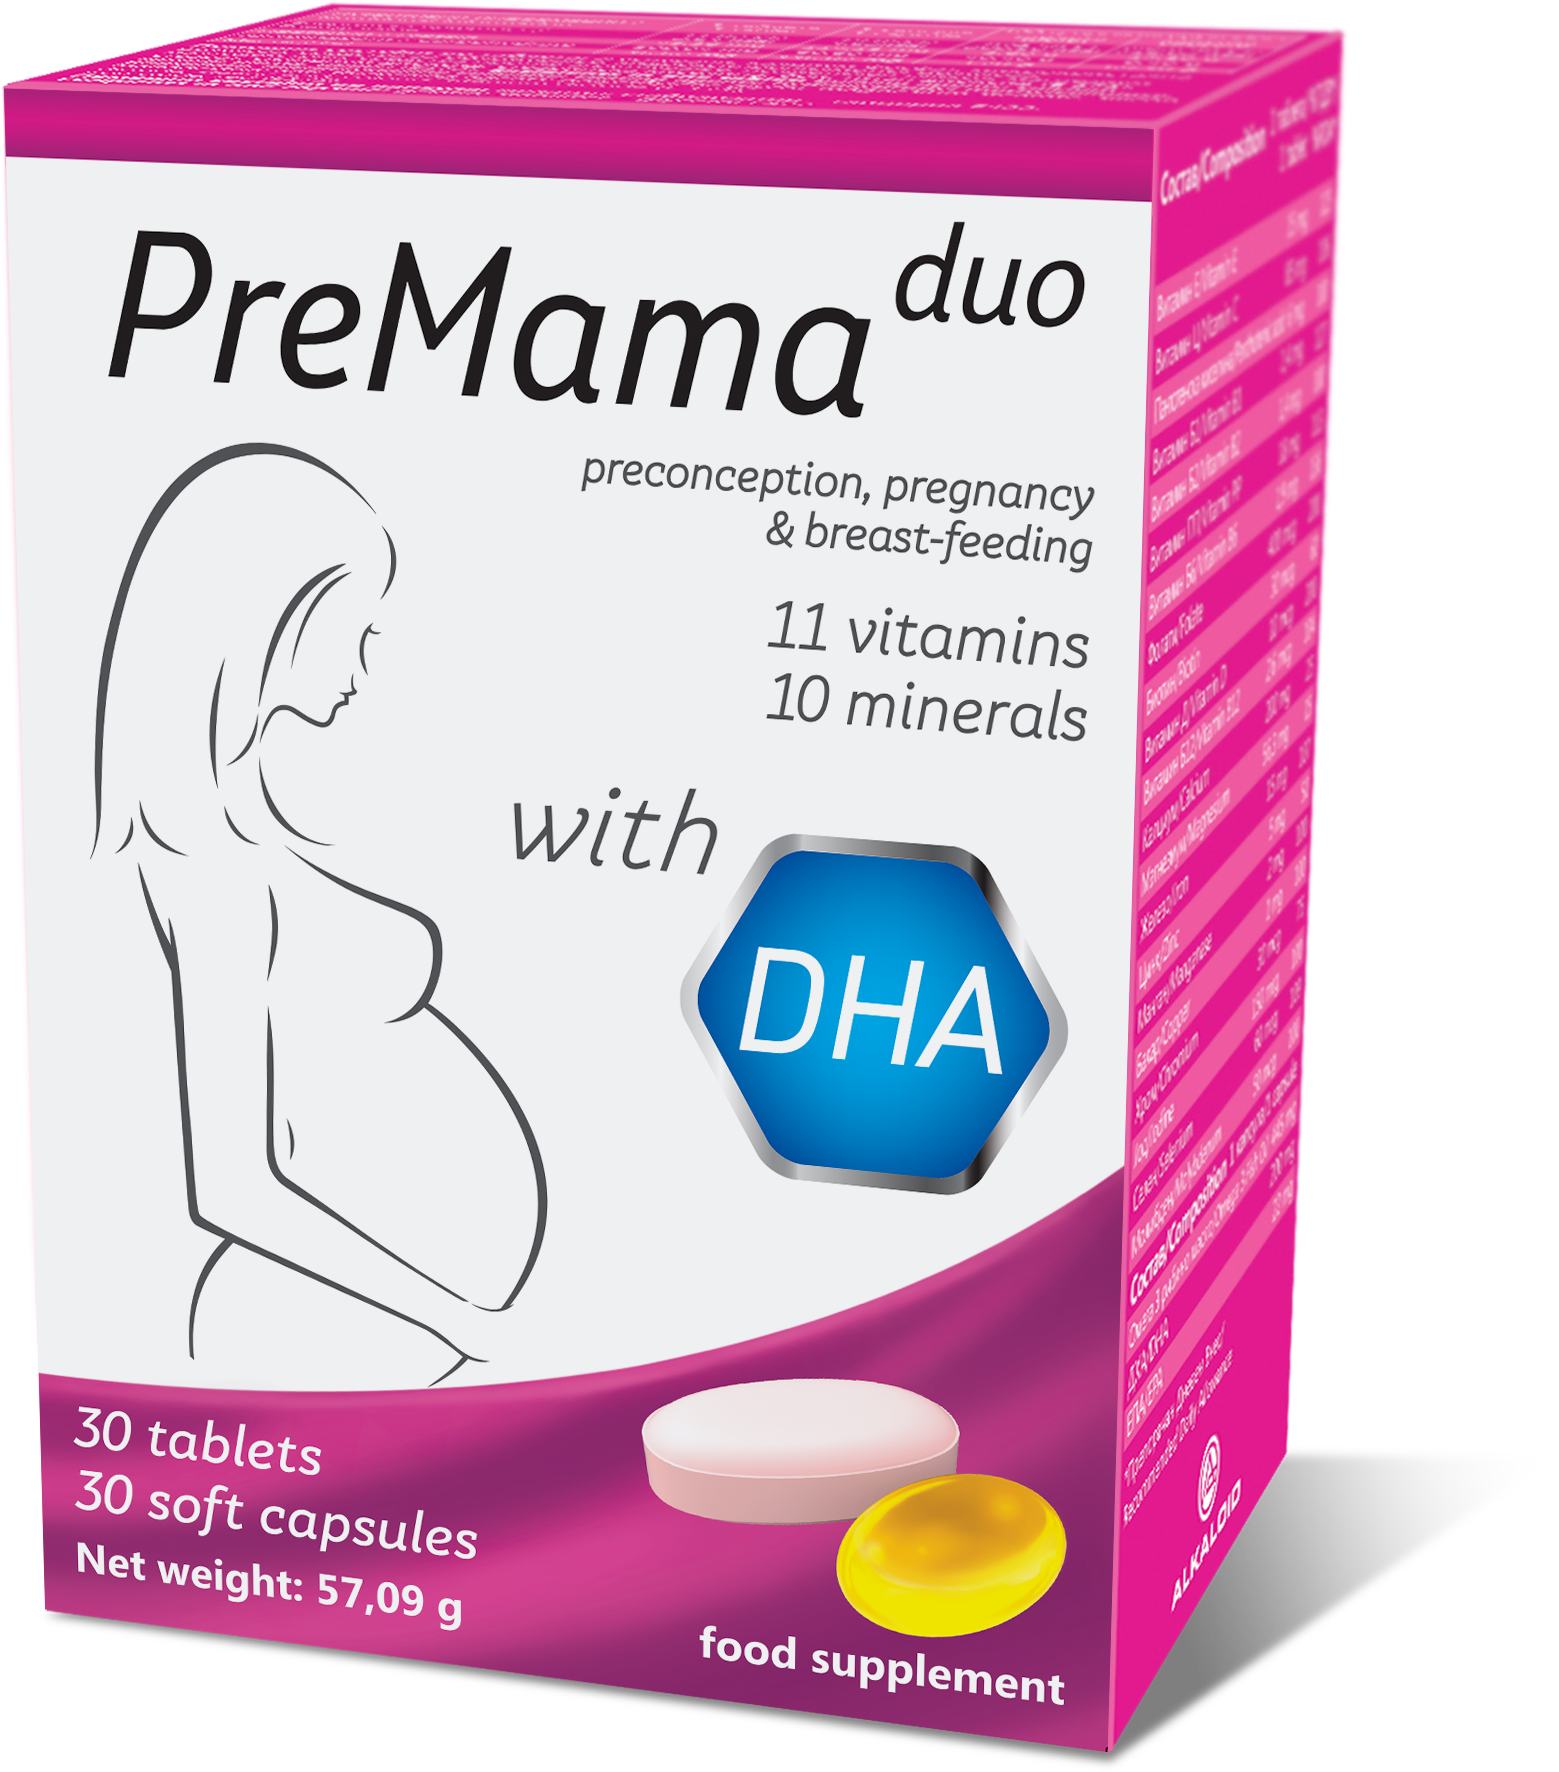 PreMama Duo Product Information